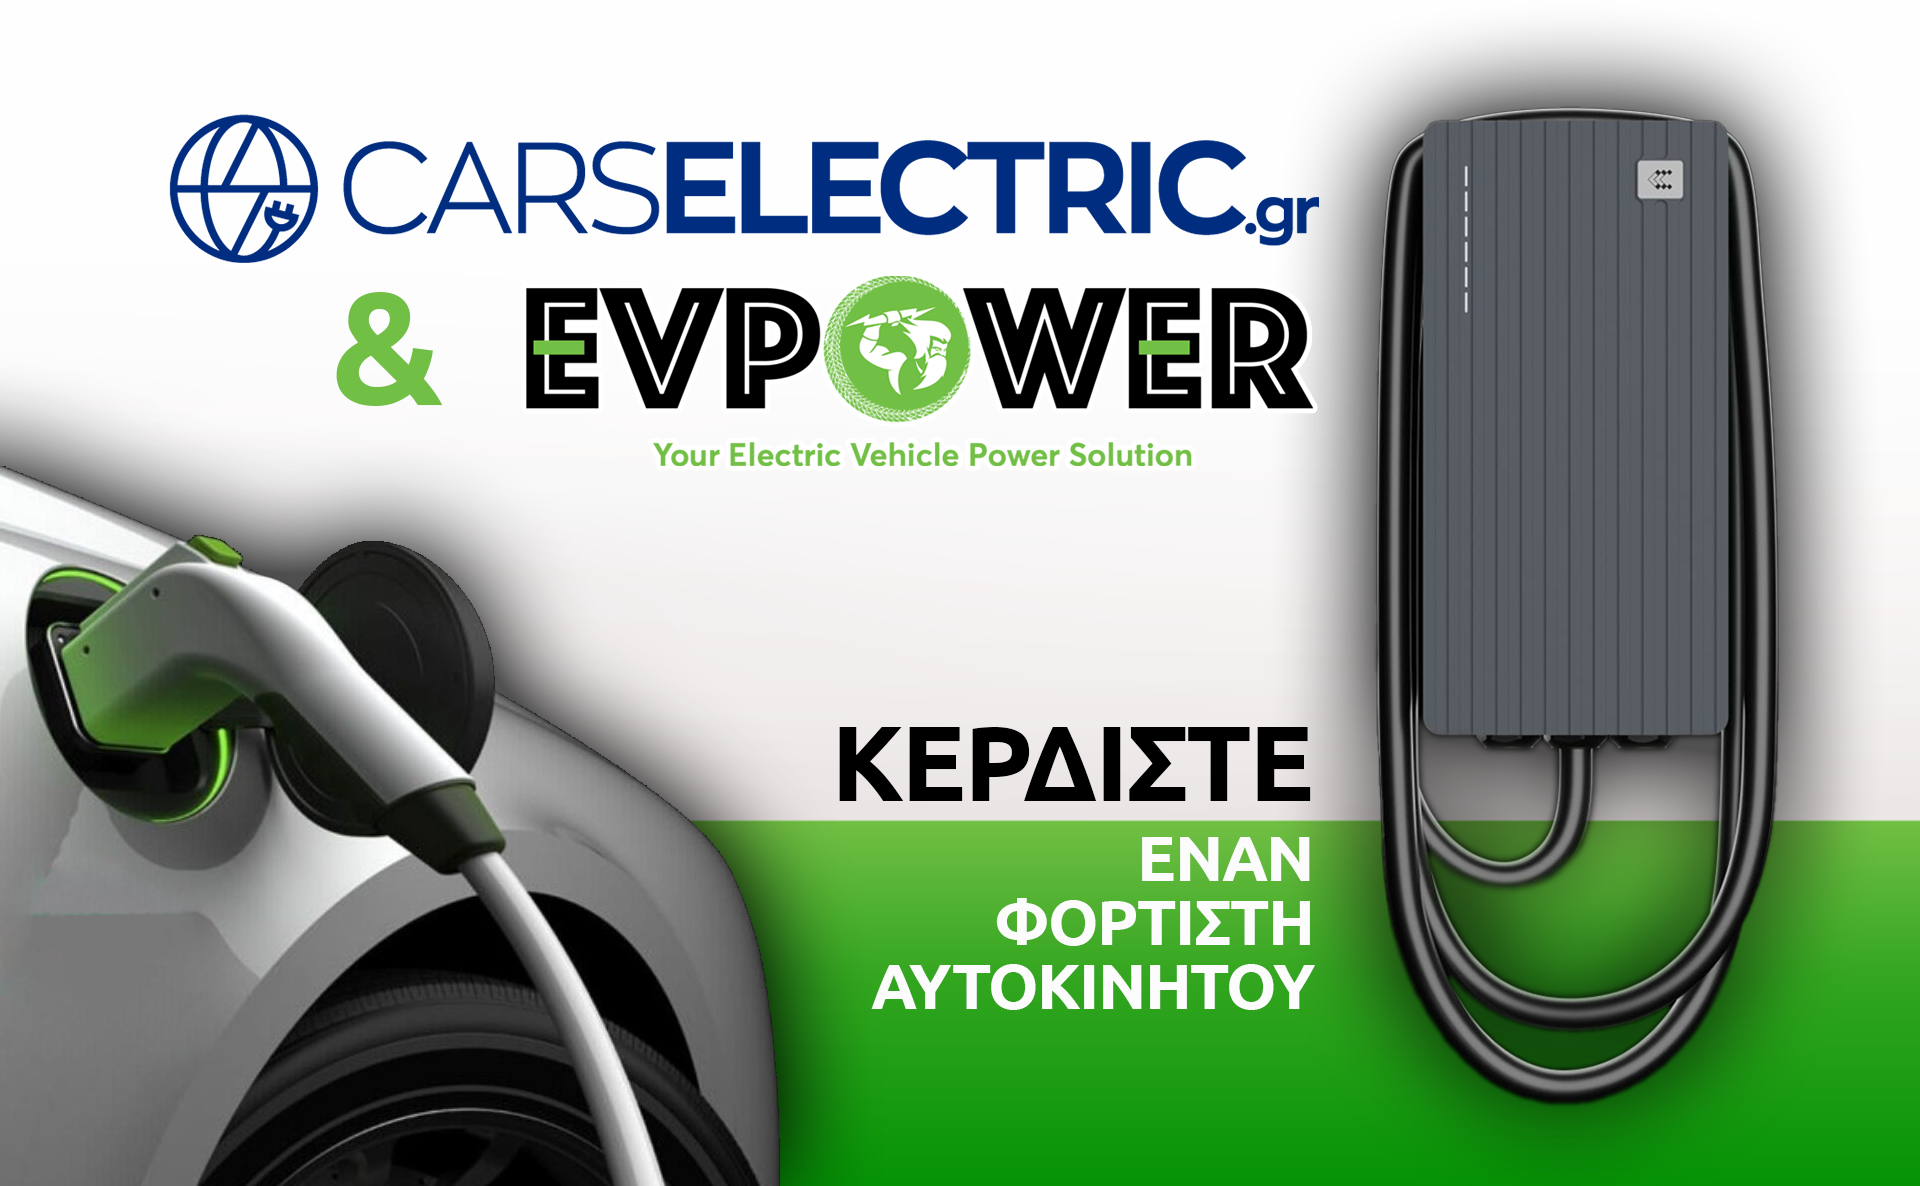 EVPOWER-CarsElectric-DIAGWNISMOS1 